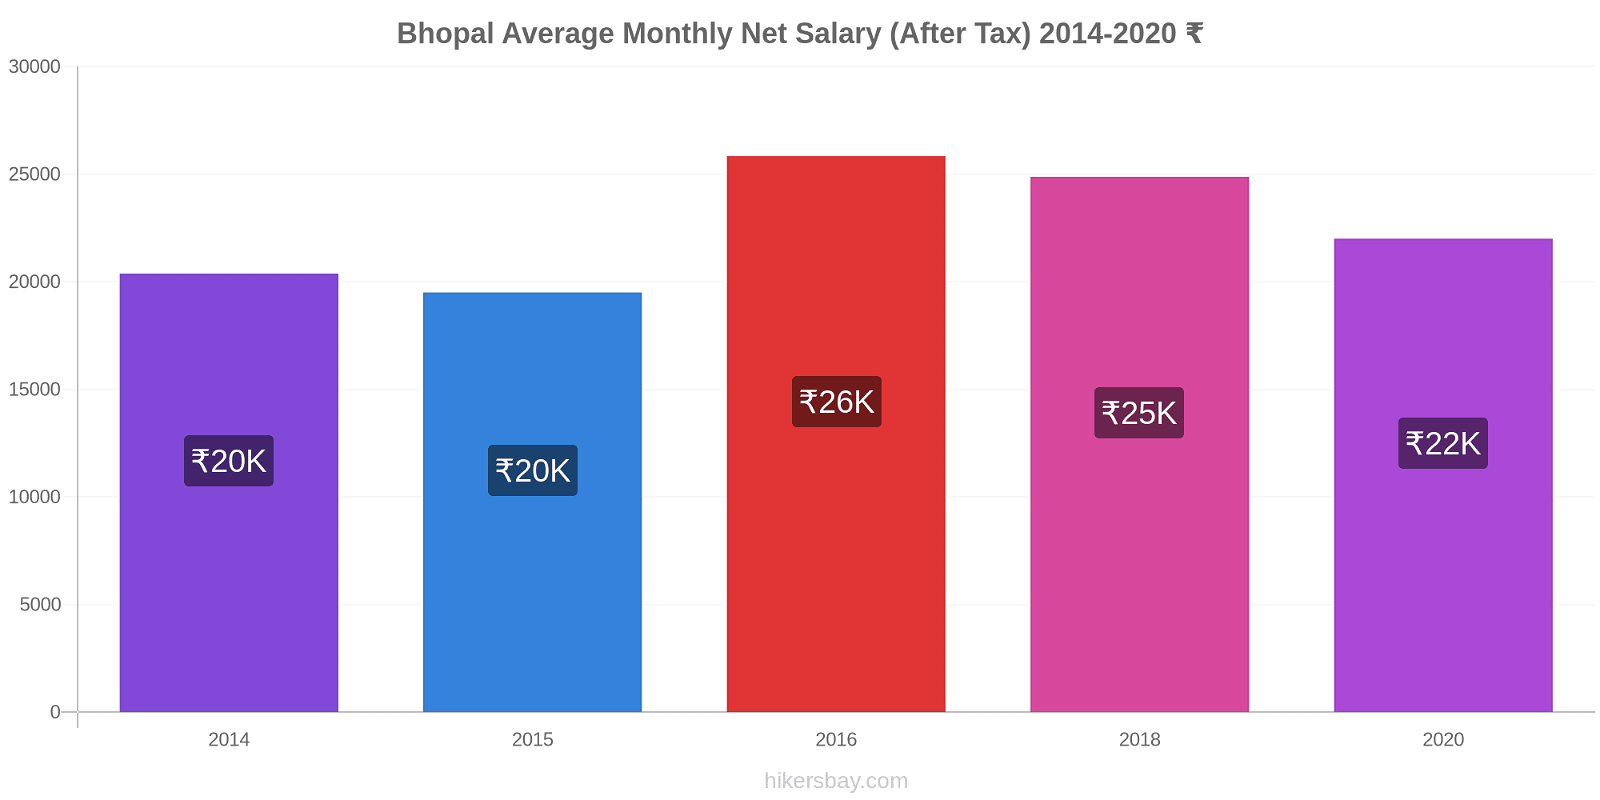 Bhopal price changes Average Monthly Net Salary (After Tax) hikersbay.com